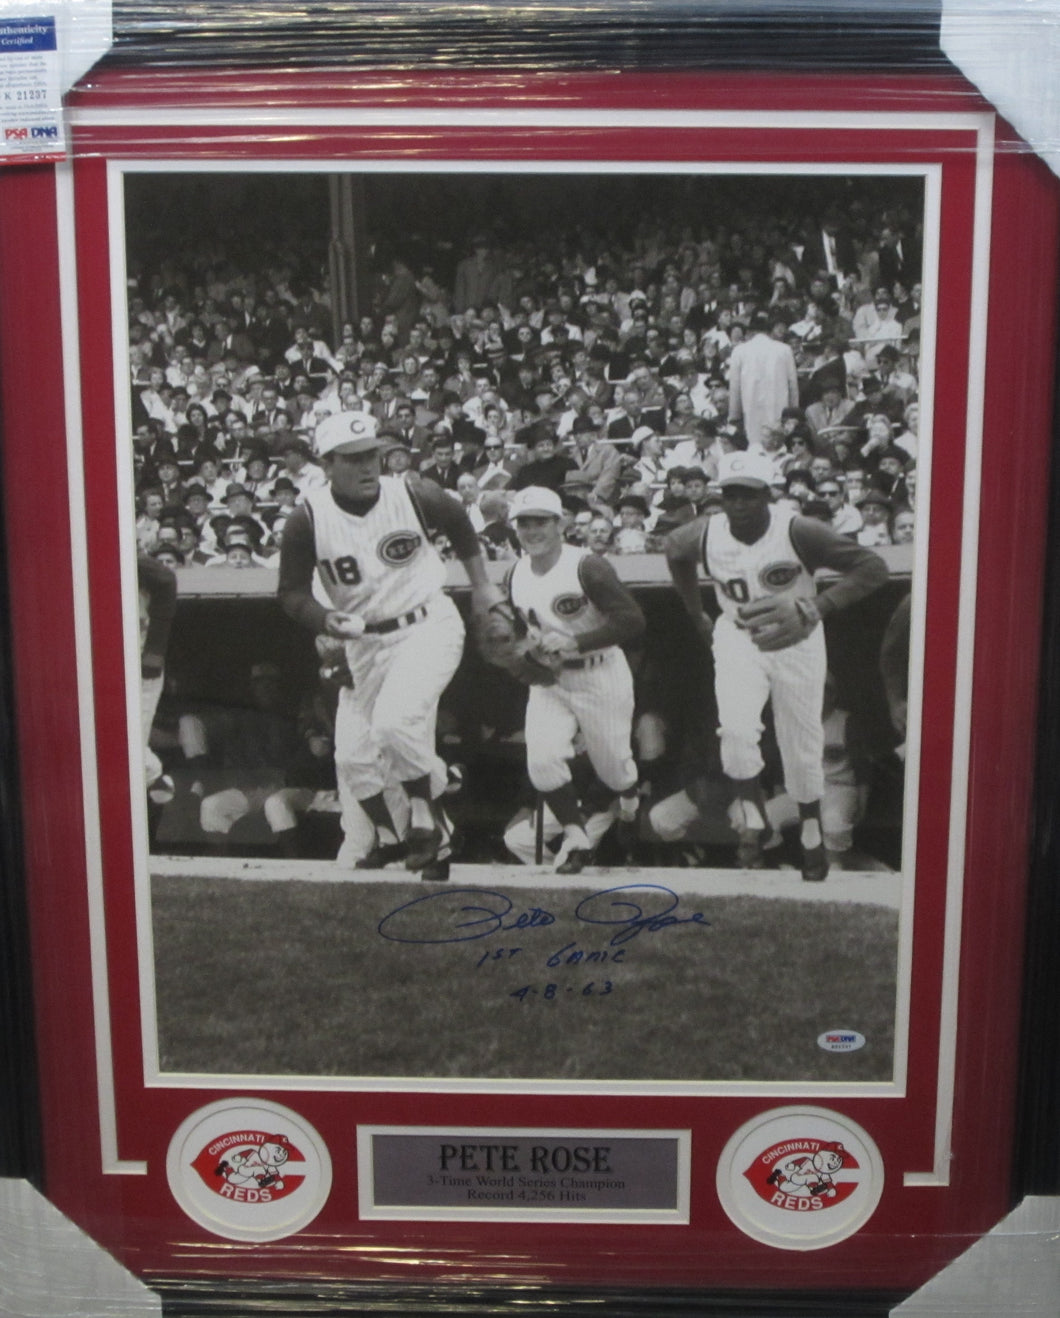 Cincinnati Reds Pete Rose Running out of Dugout SIGNED Framed 16x20 Photo with 1st Game 4-8-63 Inscription & PSA COA